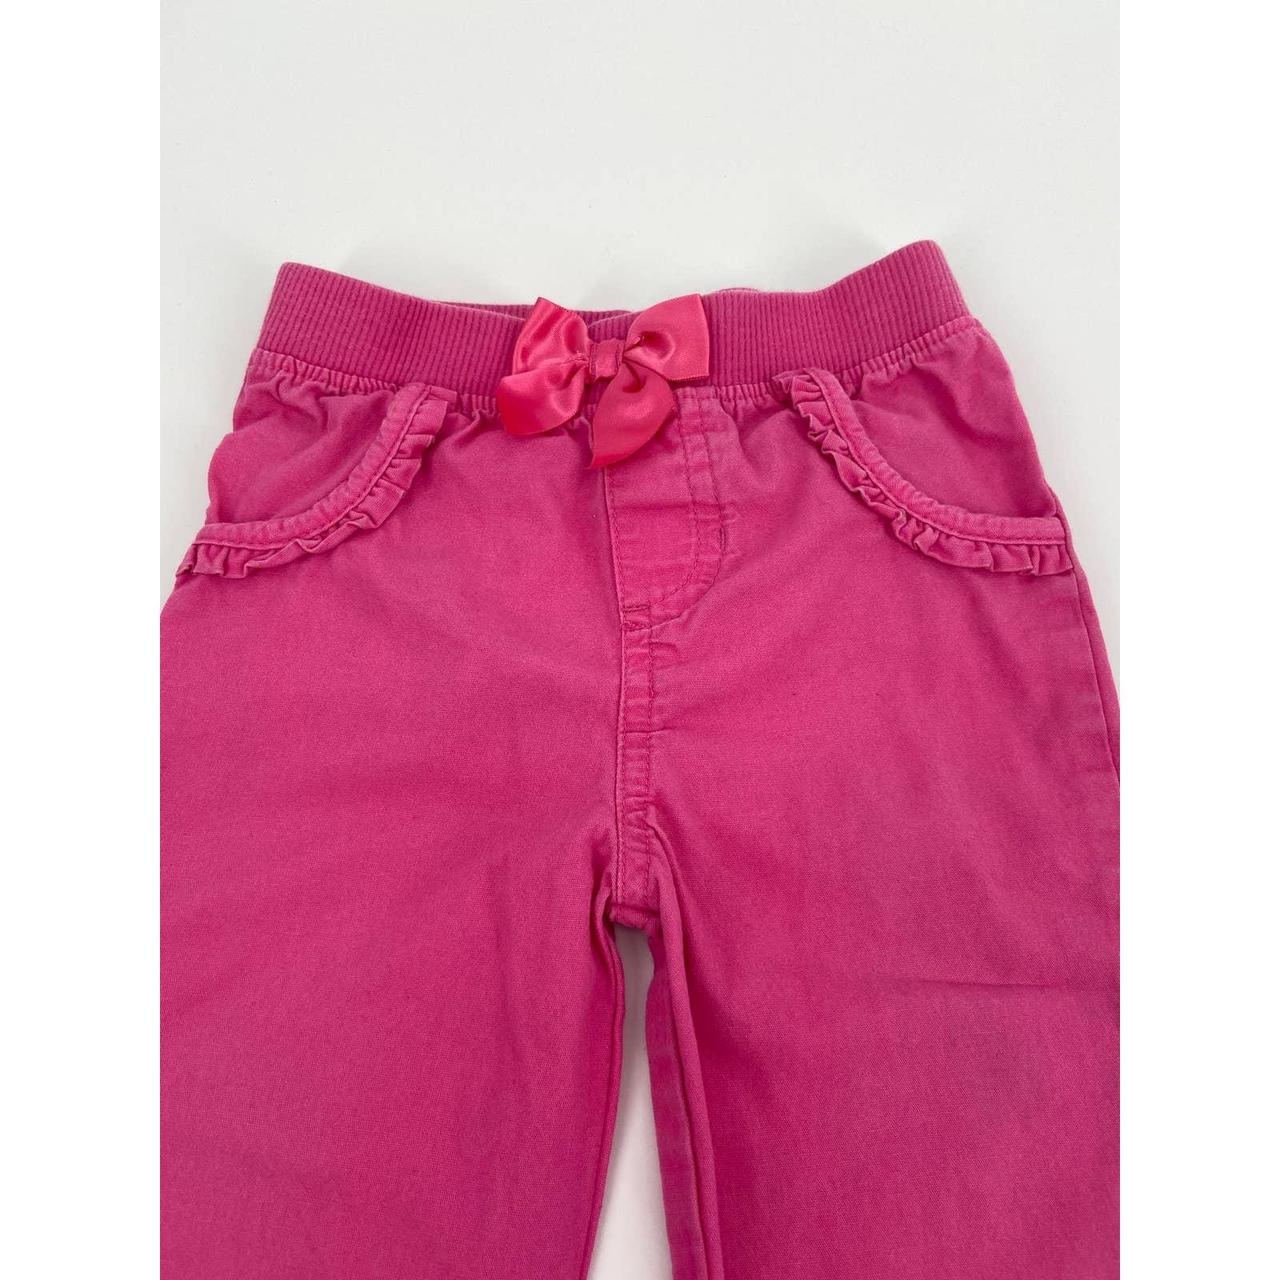 Product Image 2 - Little girls pink pants 12